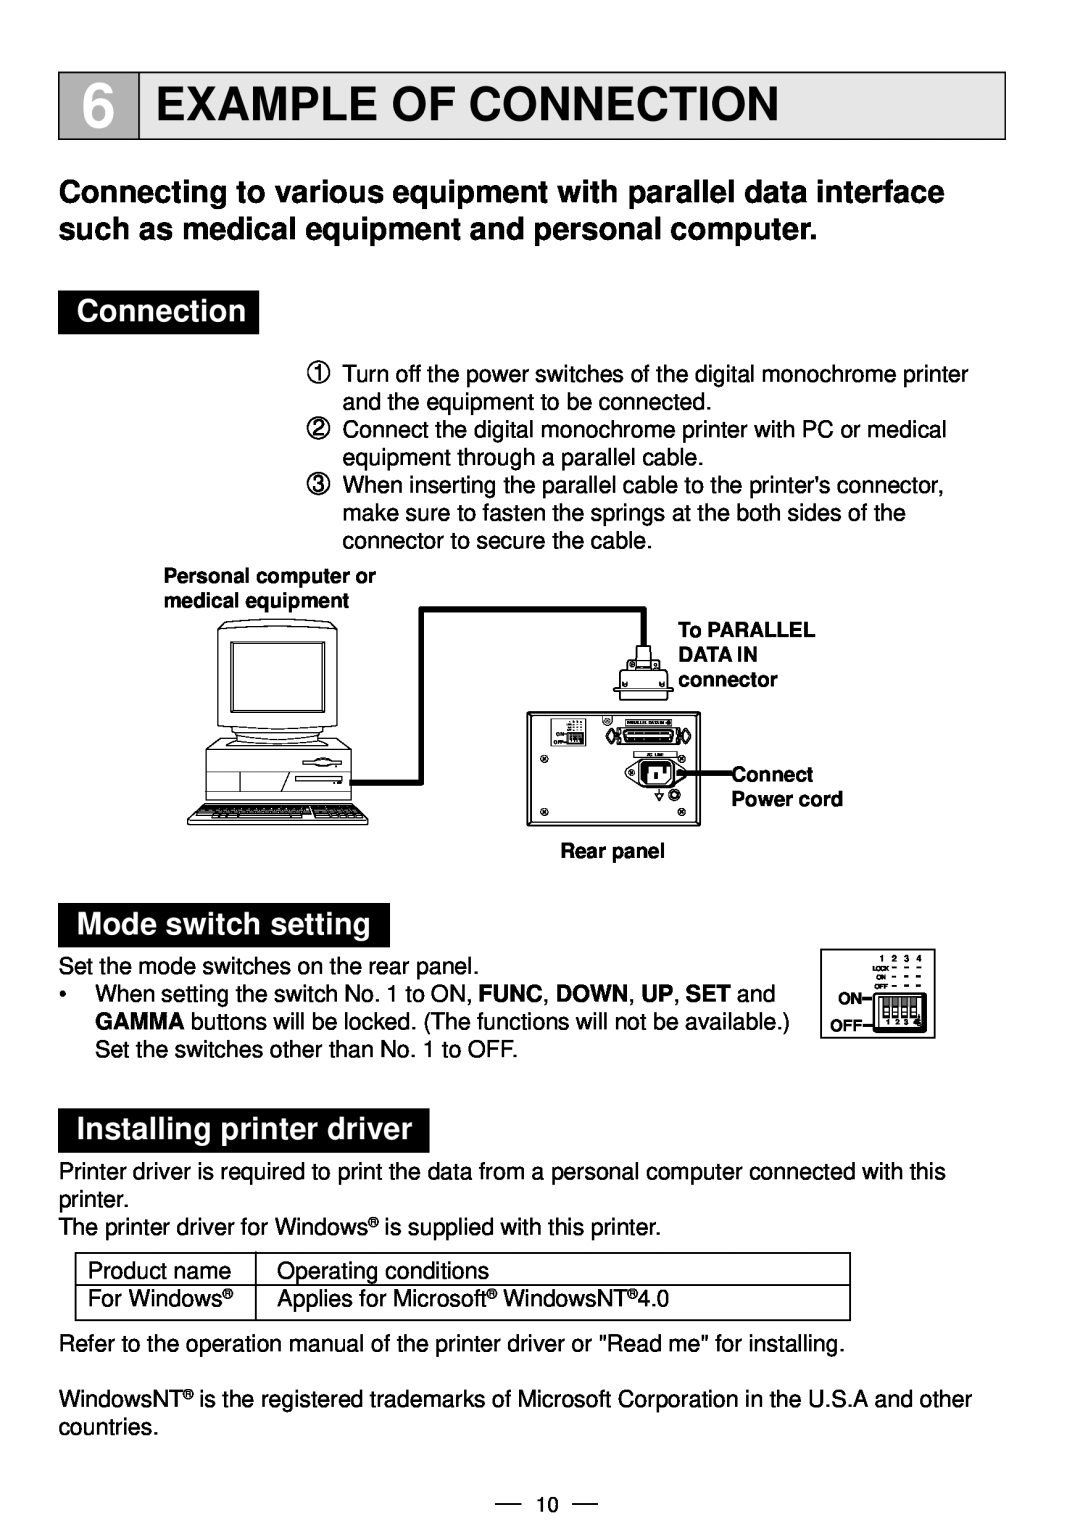 Mitsubishi Electronics P91DW operation manual Example Of Connection, Mode switch setting, Installing printer driver 